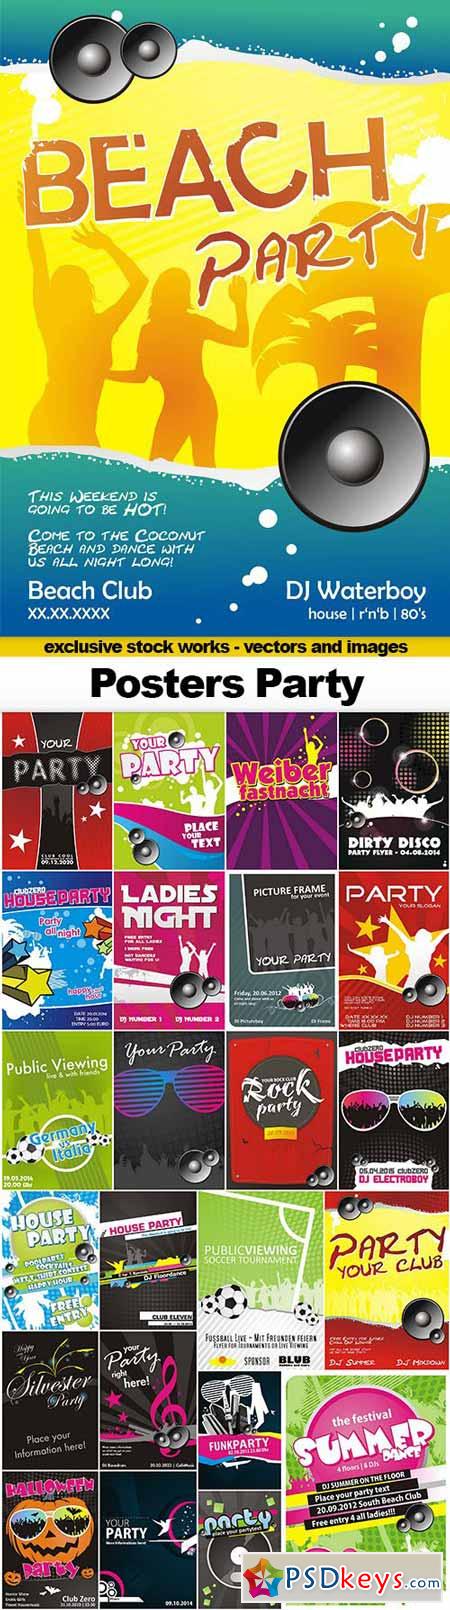 Posters Party - 25x EPS